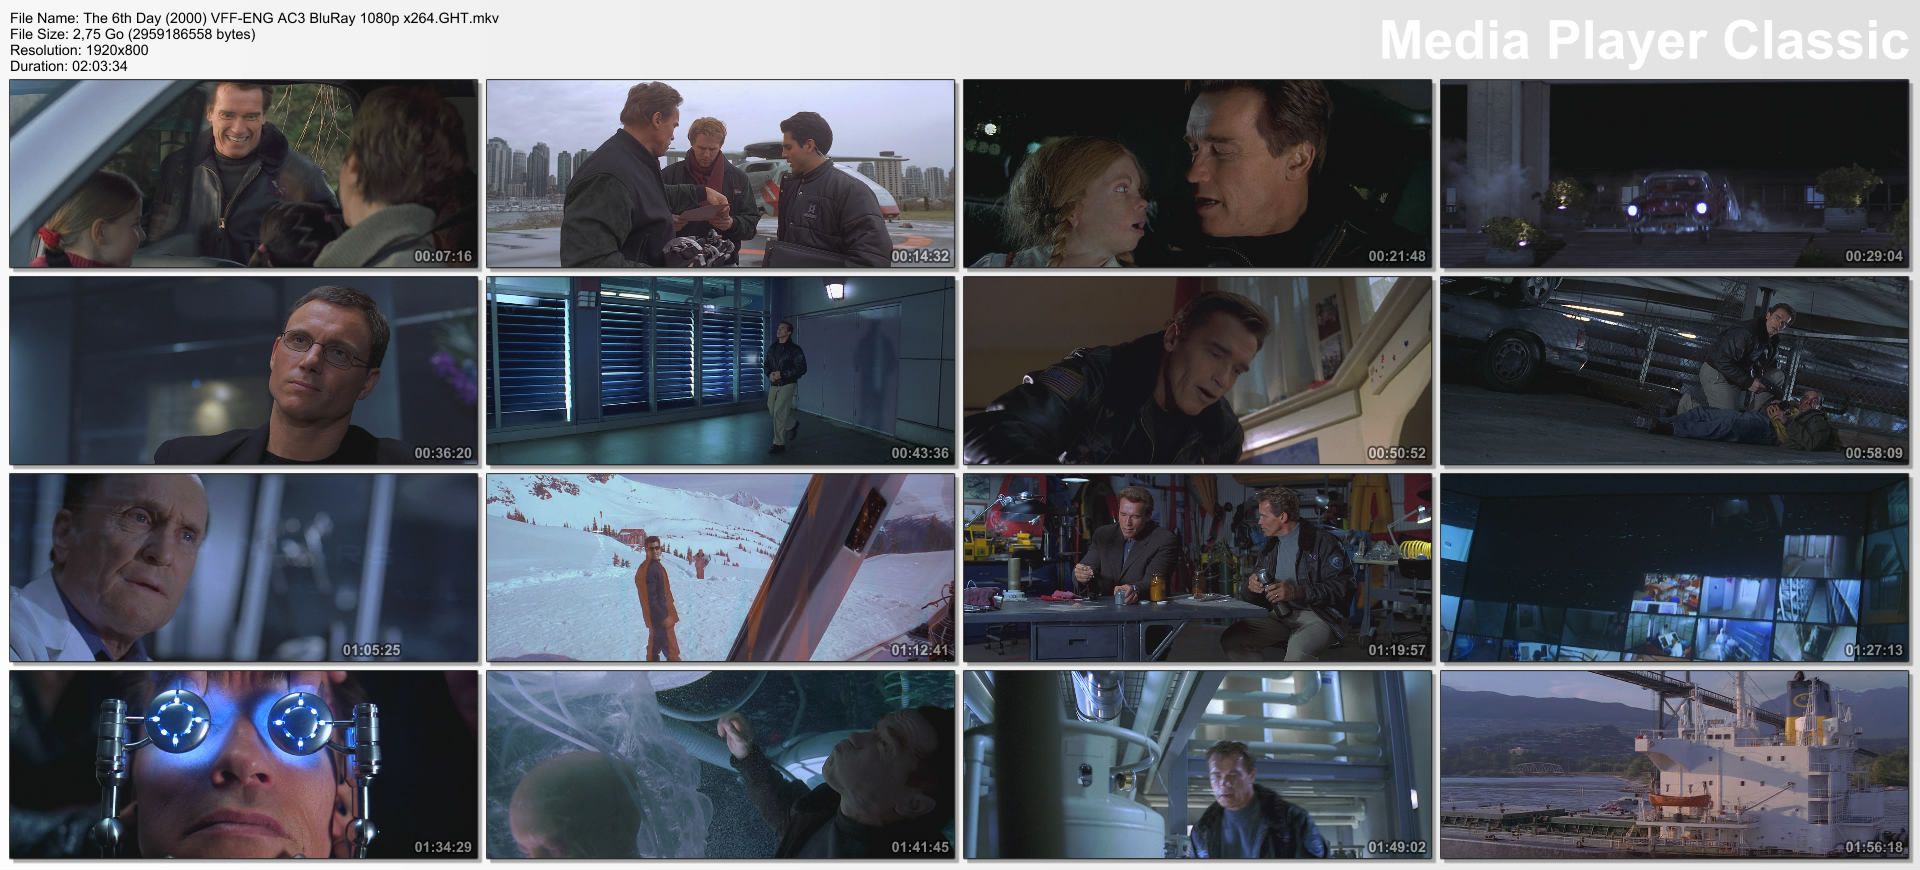 The 6th Day (2000) VFF-ENG AC3 BluRay 1080p x264.GHT